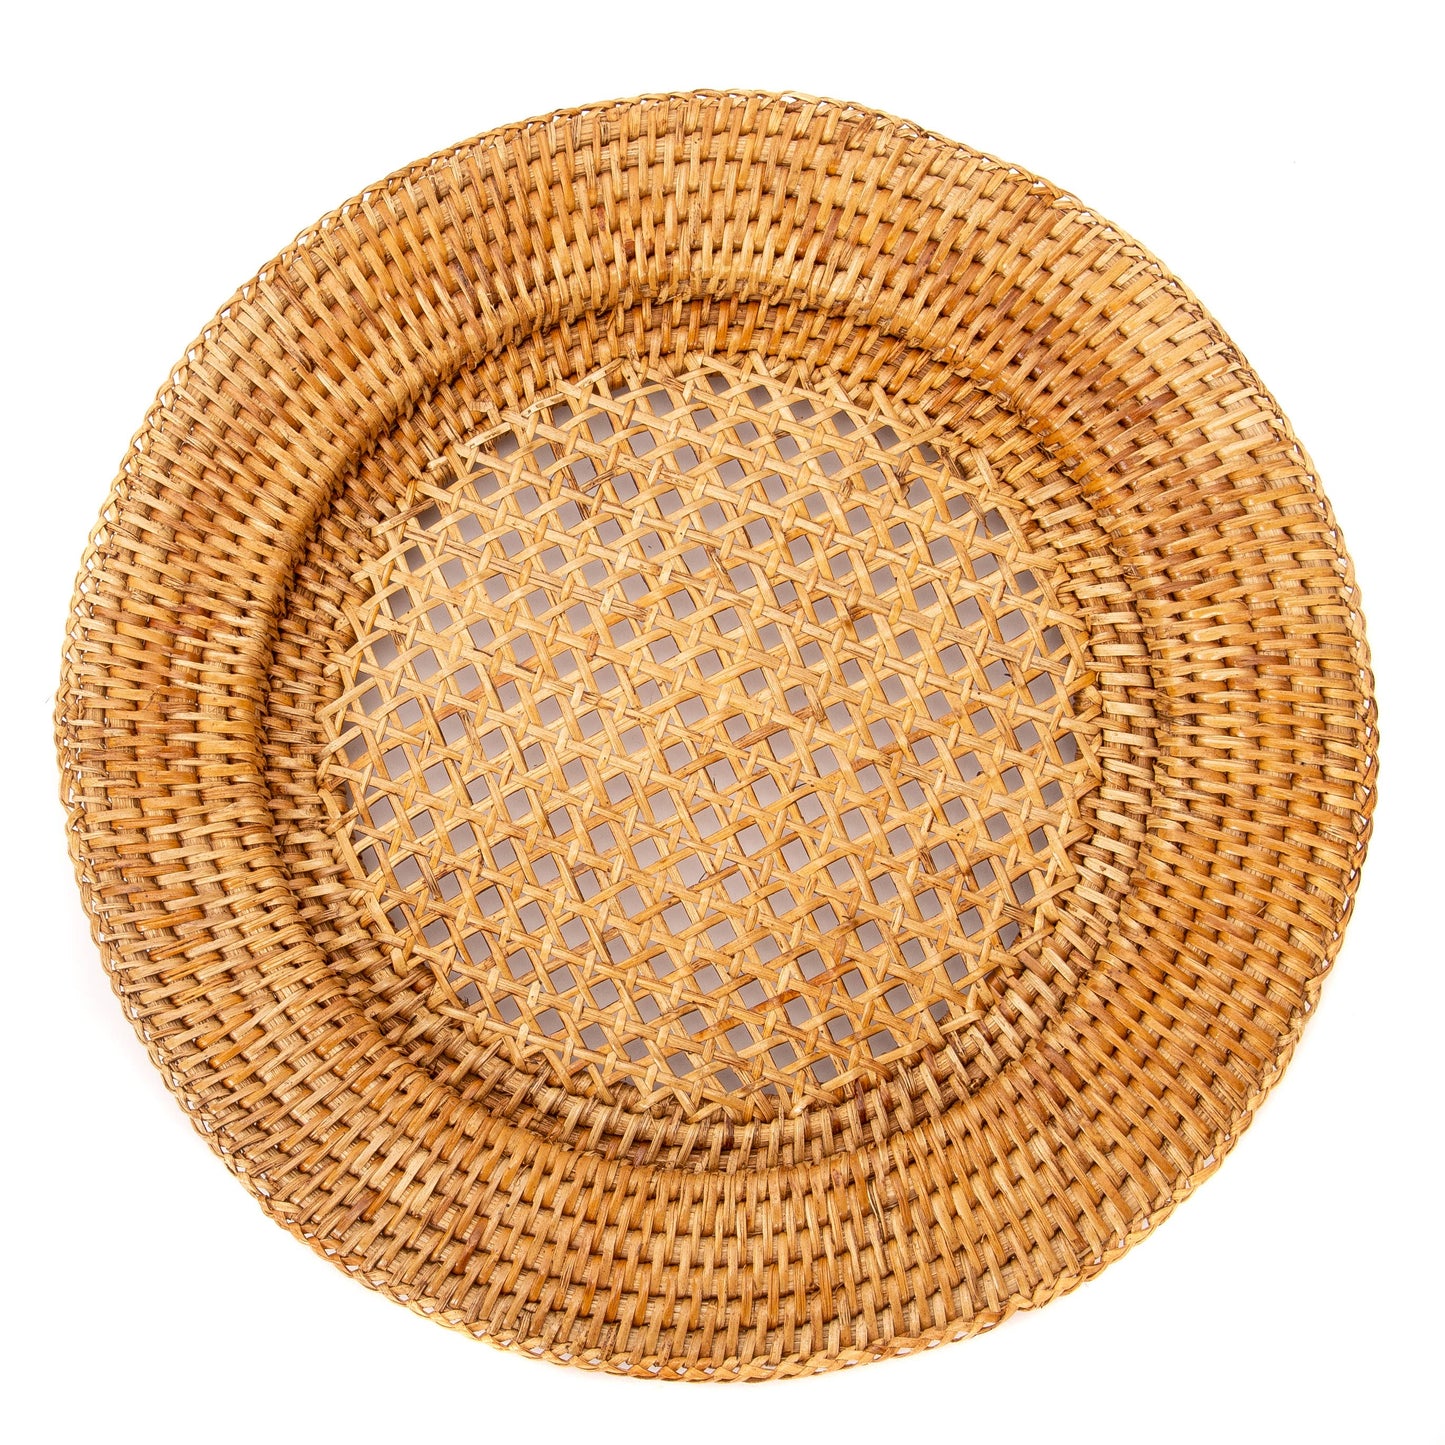 WOVEN RATTAN CHARGER, HONEY BROWN (SET OF 4)